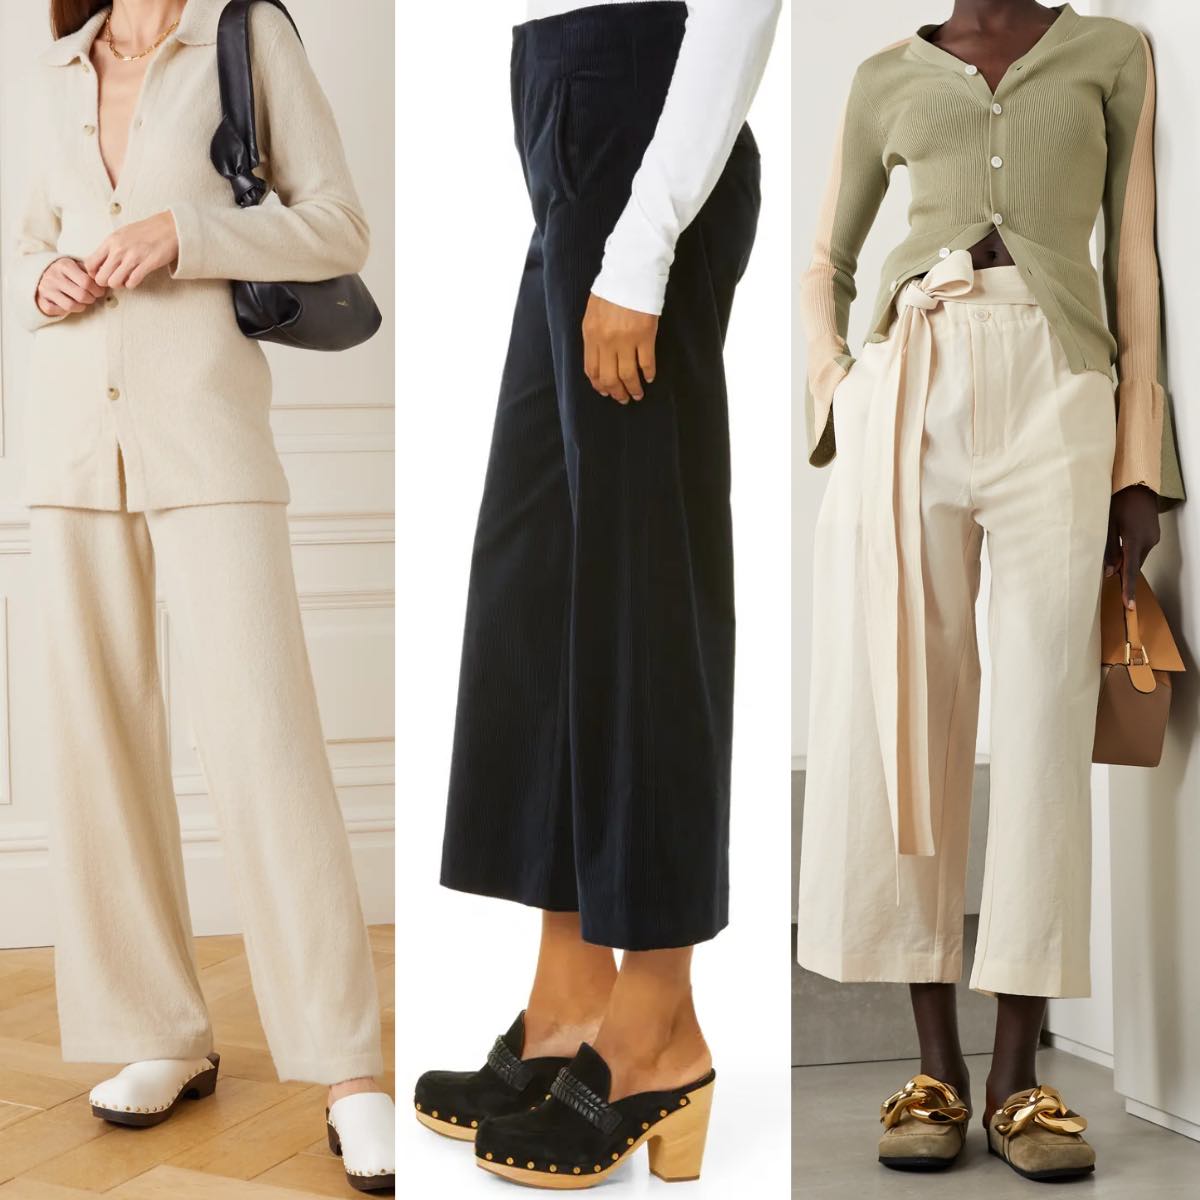 4 Things You Must Know to Match Shoe Styles with Your Pants  Inside Out  Style